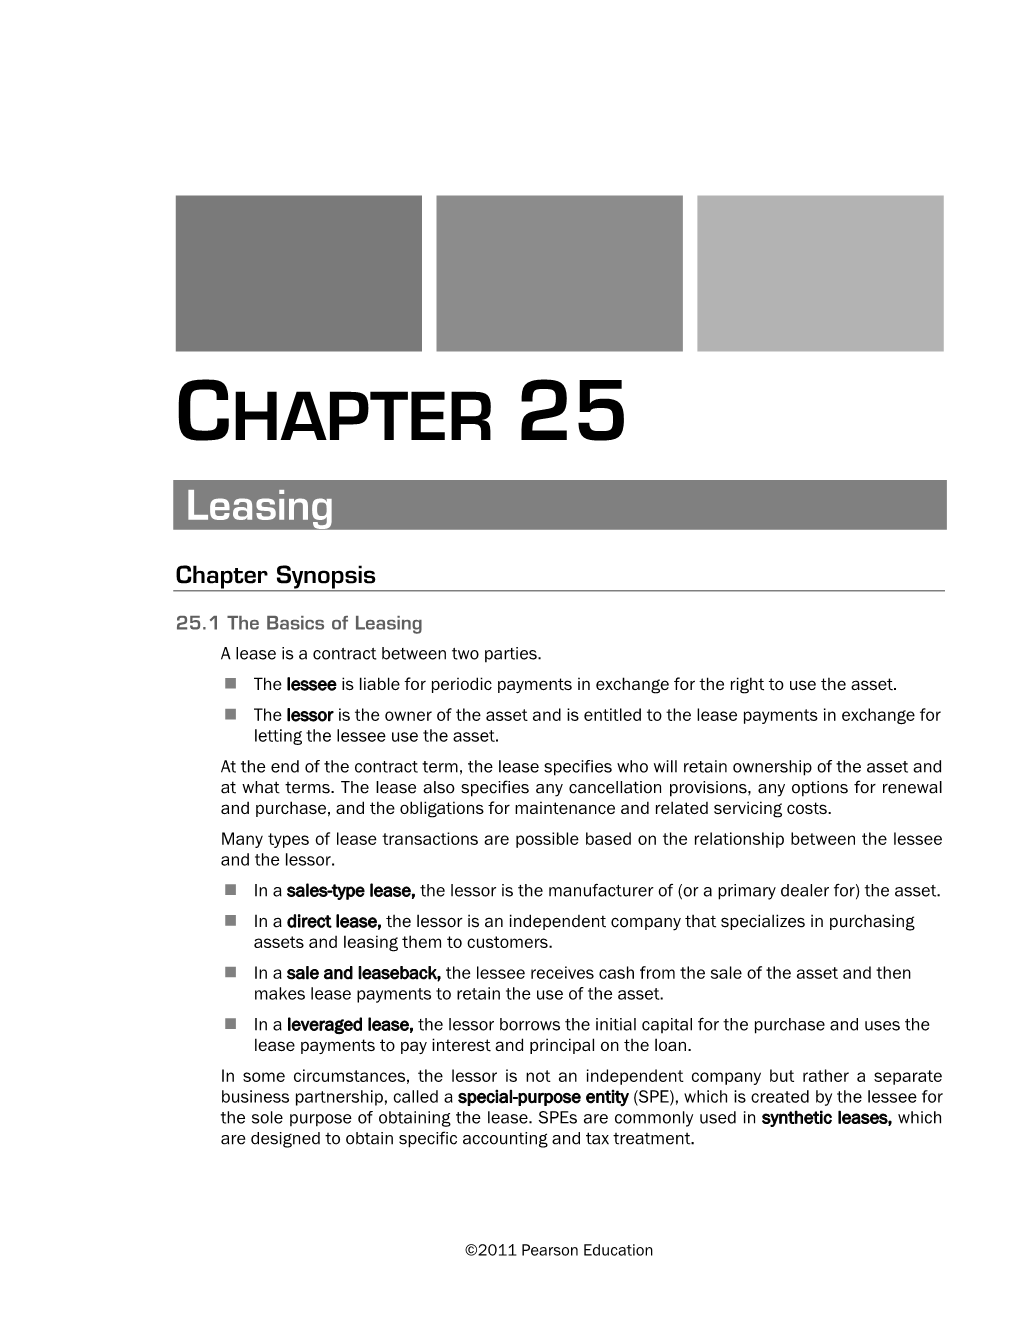 CHAPTER 25 Leasing